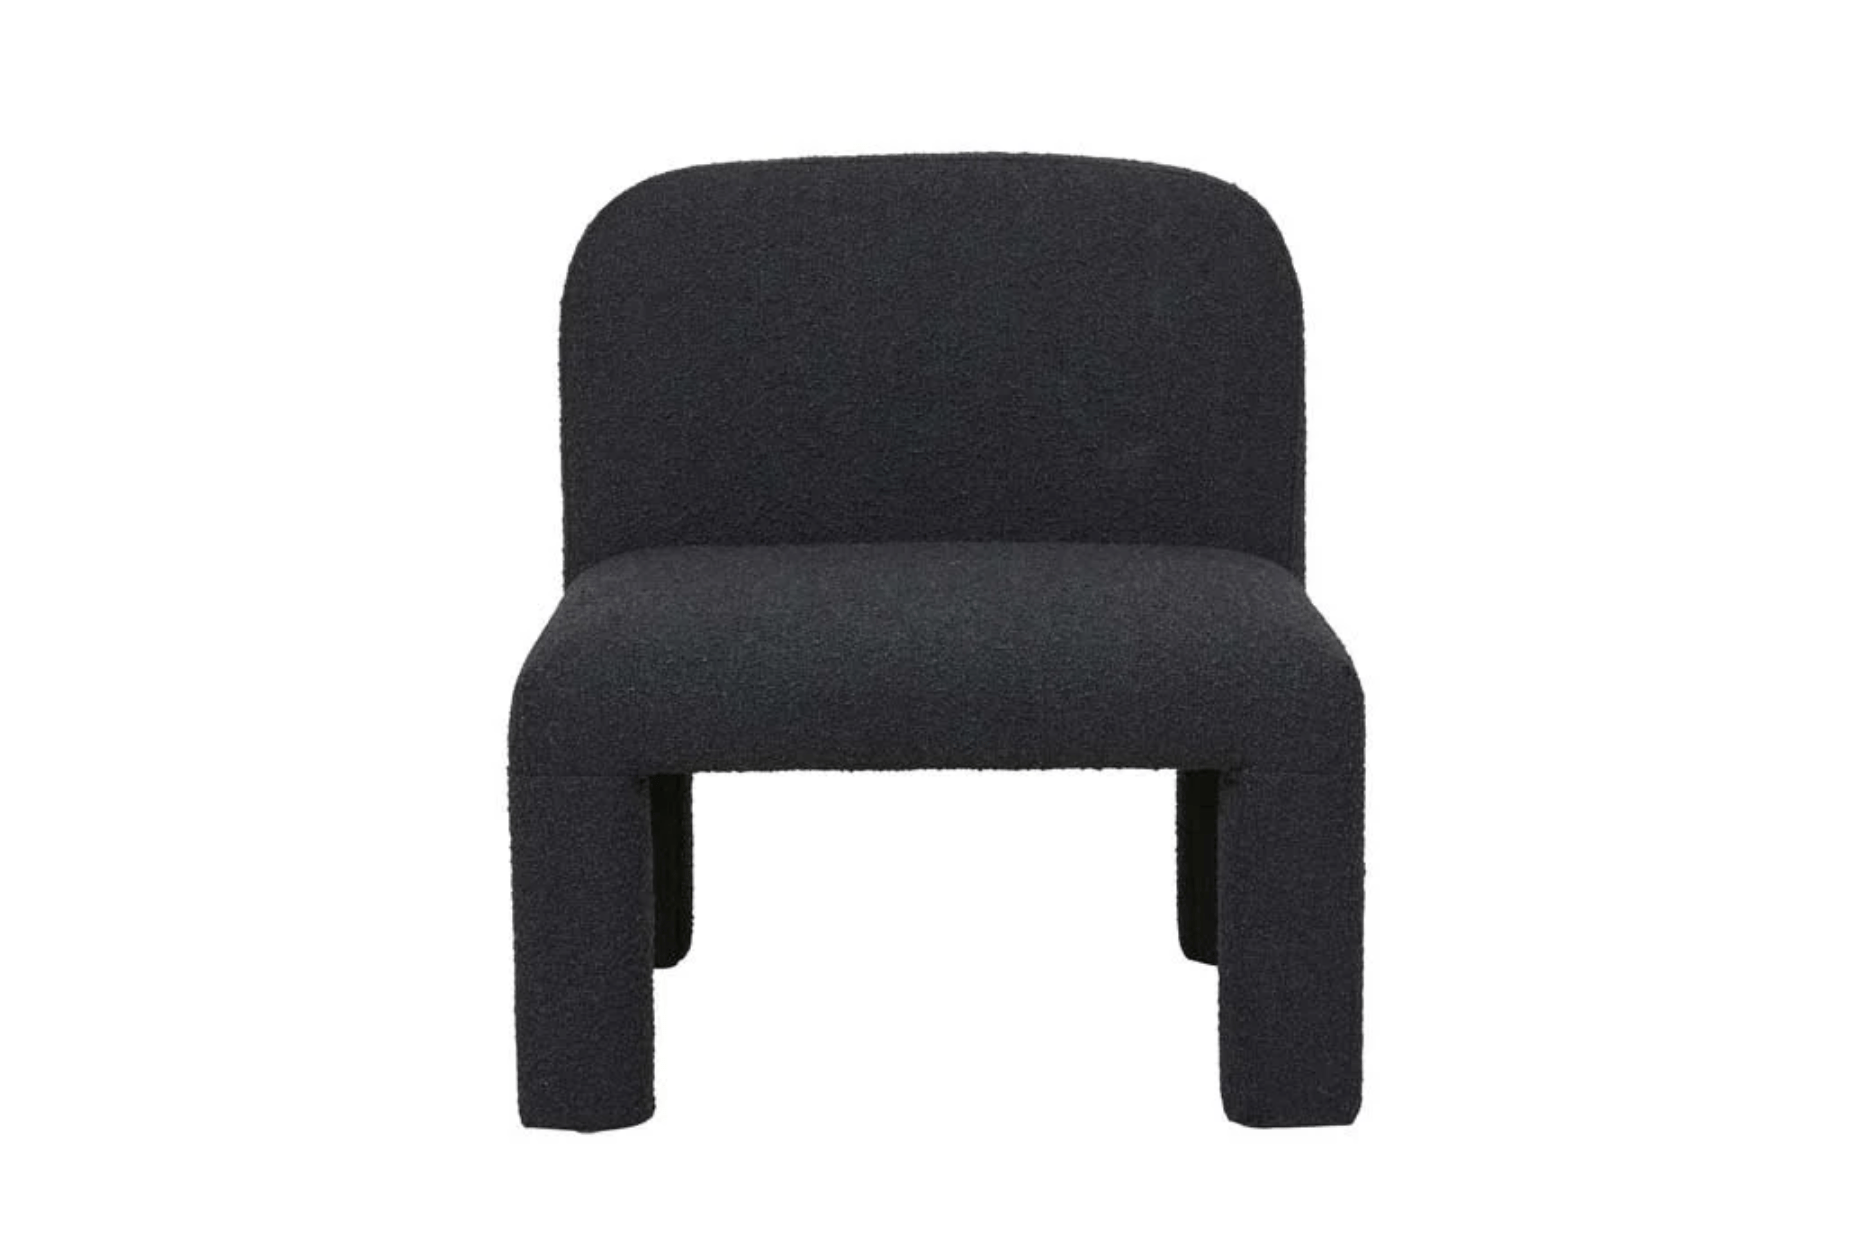 Globe West Occasional Chairs Globe West Hugo Arc Occasional Chair, Charcoal Boucle (7586549170425)